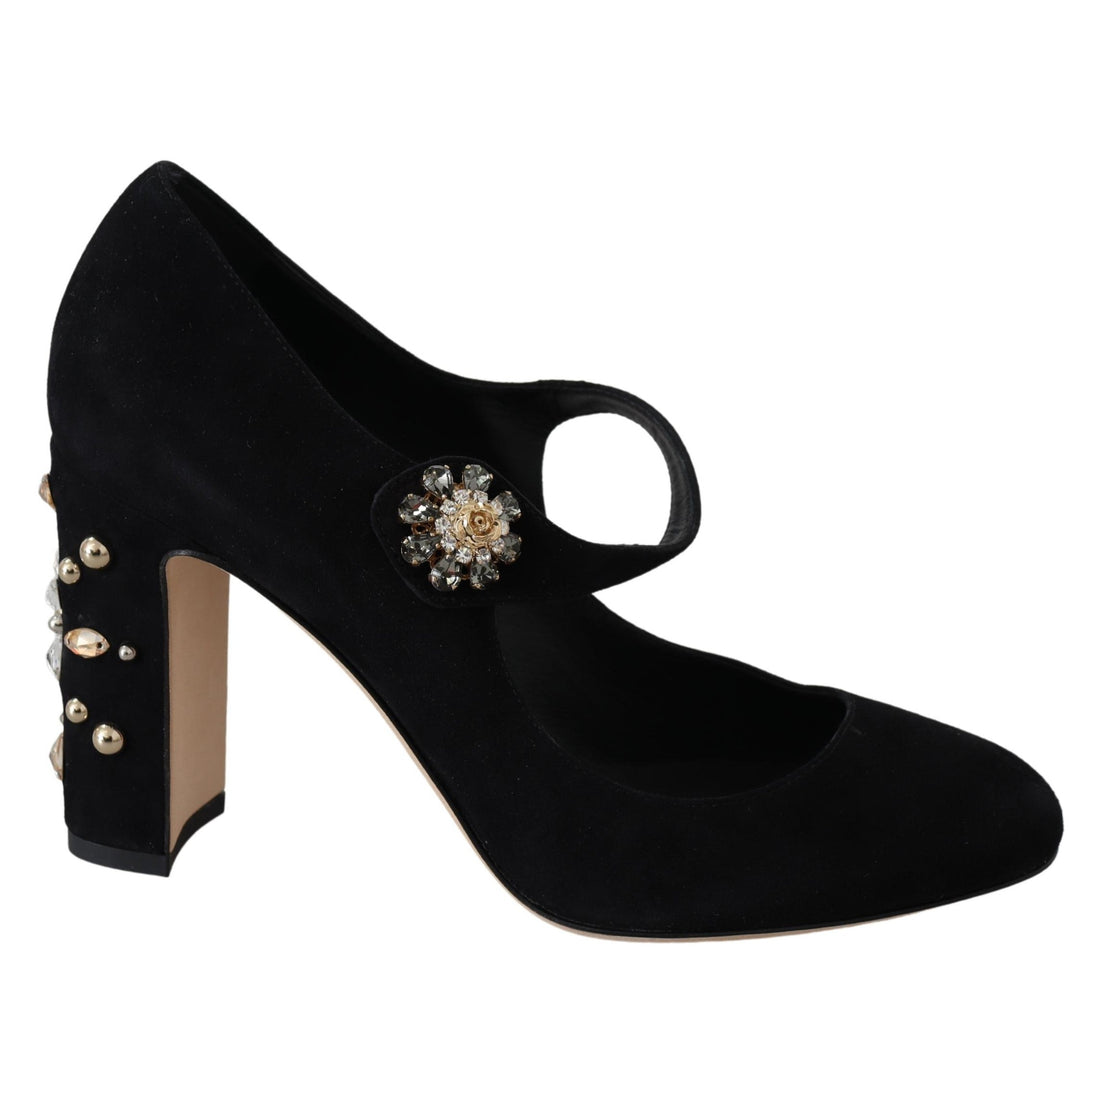 Dolce & Gabbana Black Suede Crystal Heels Mary Jane Shoes